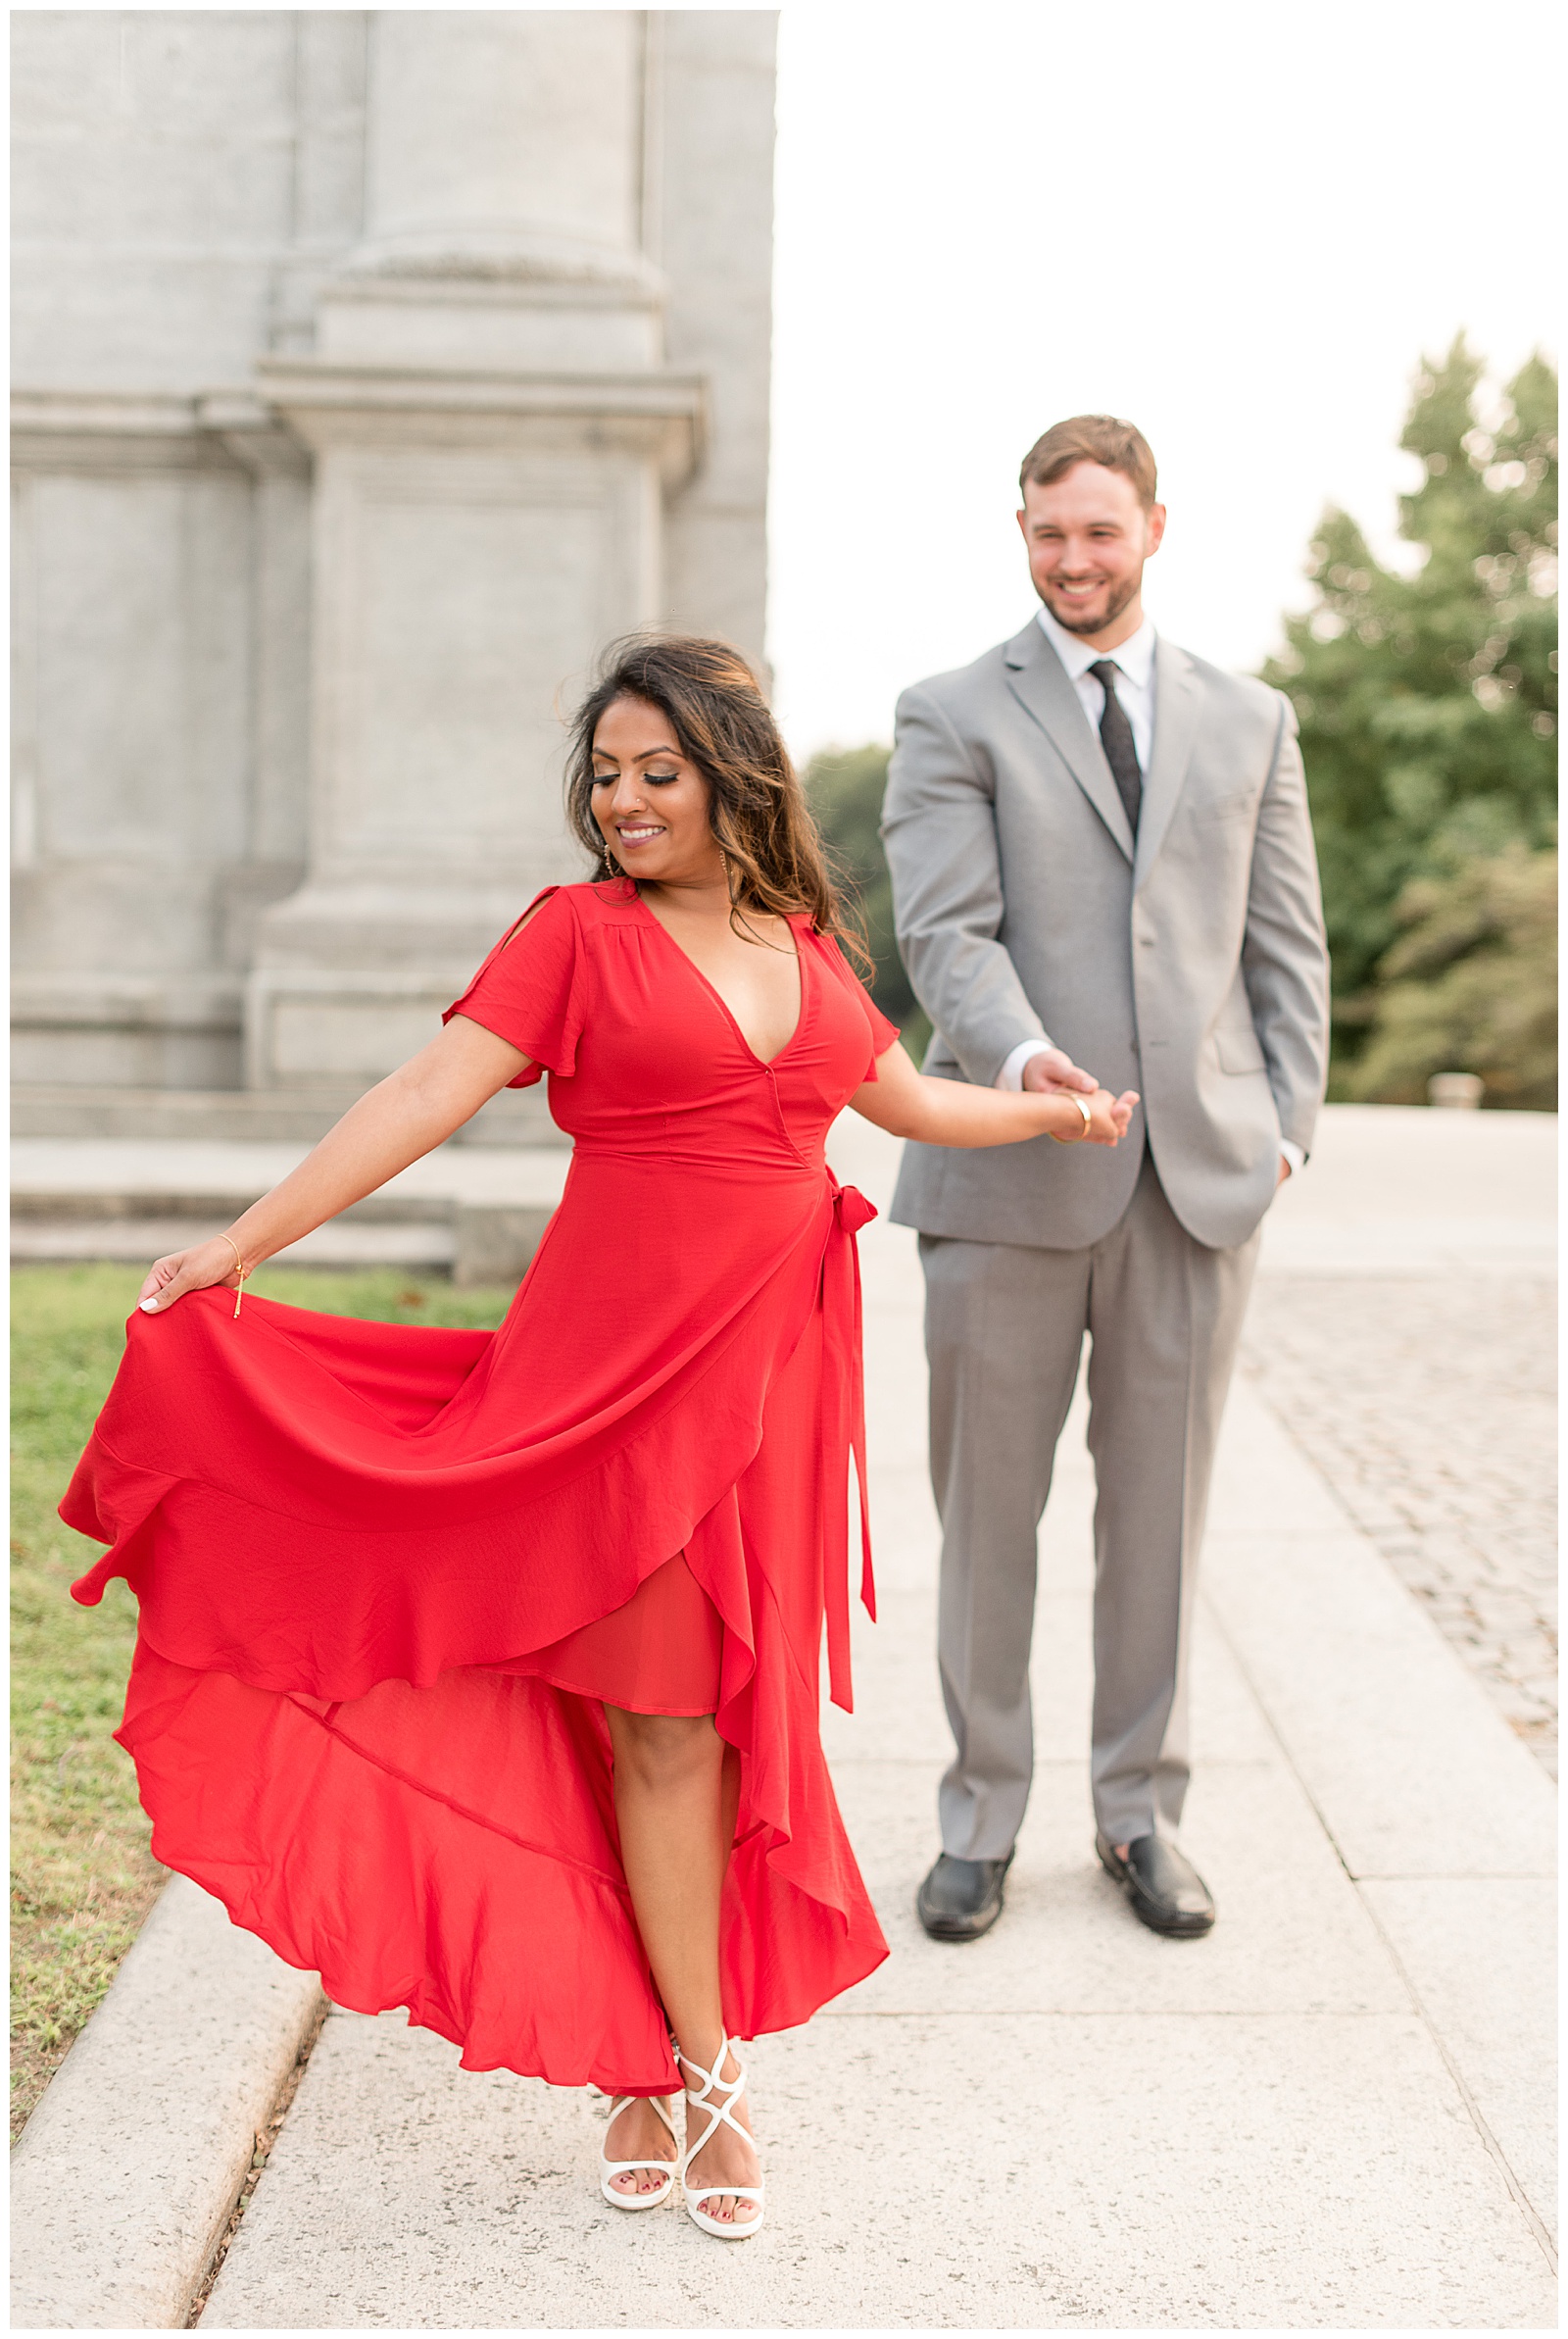 Girl in flowy red dress smiling down towards hand as guy holds her hand from behind smiling at her